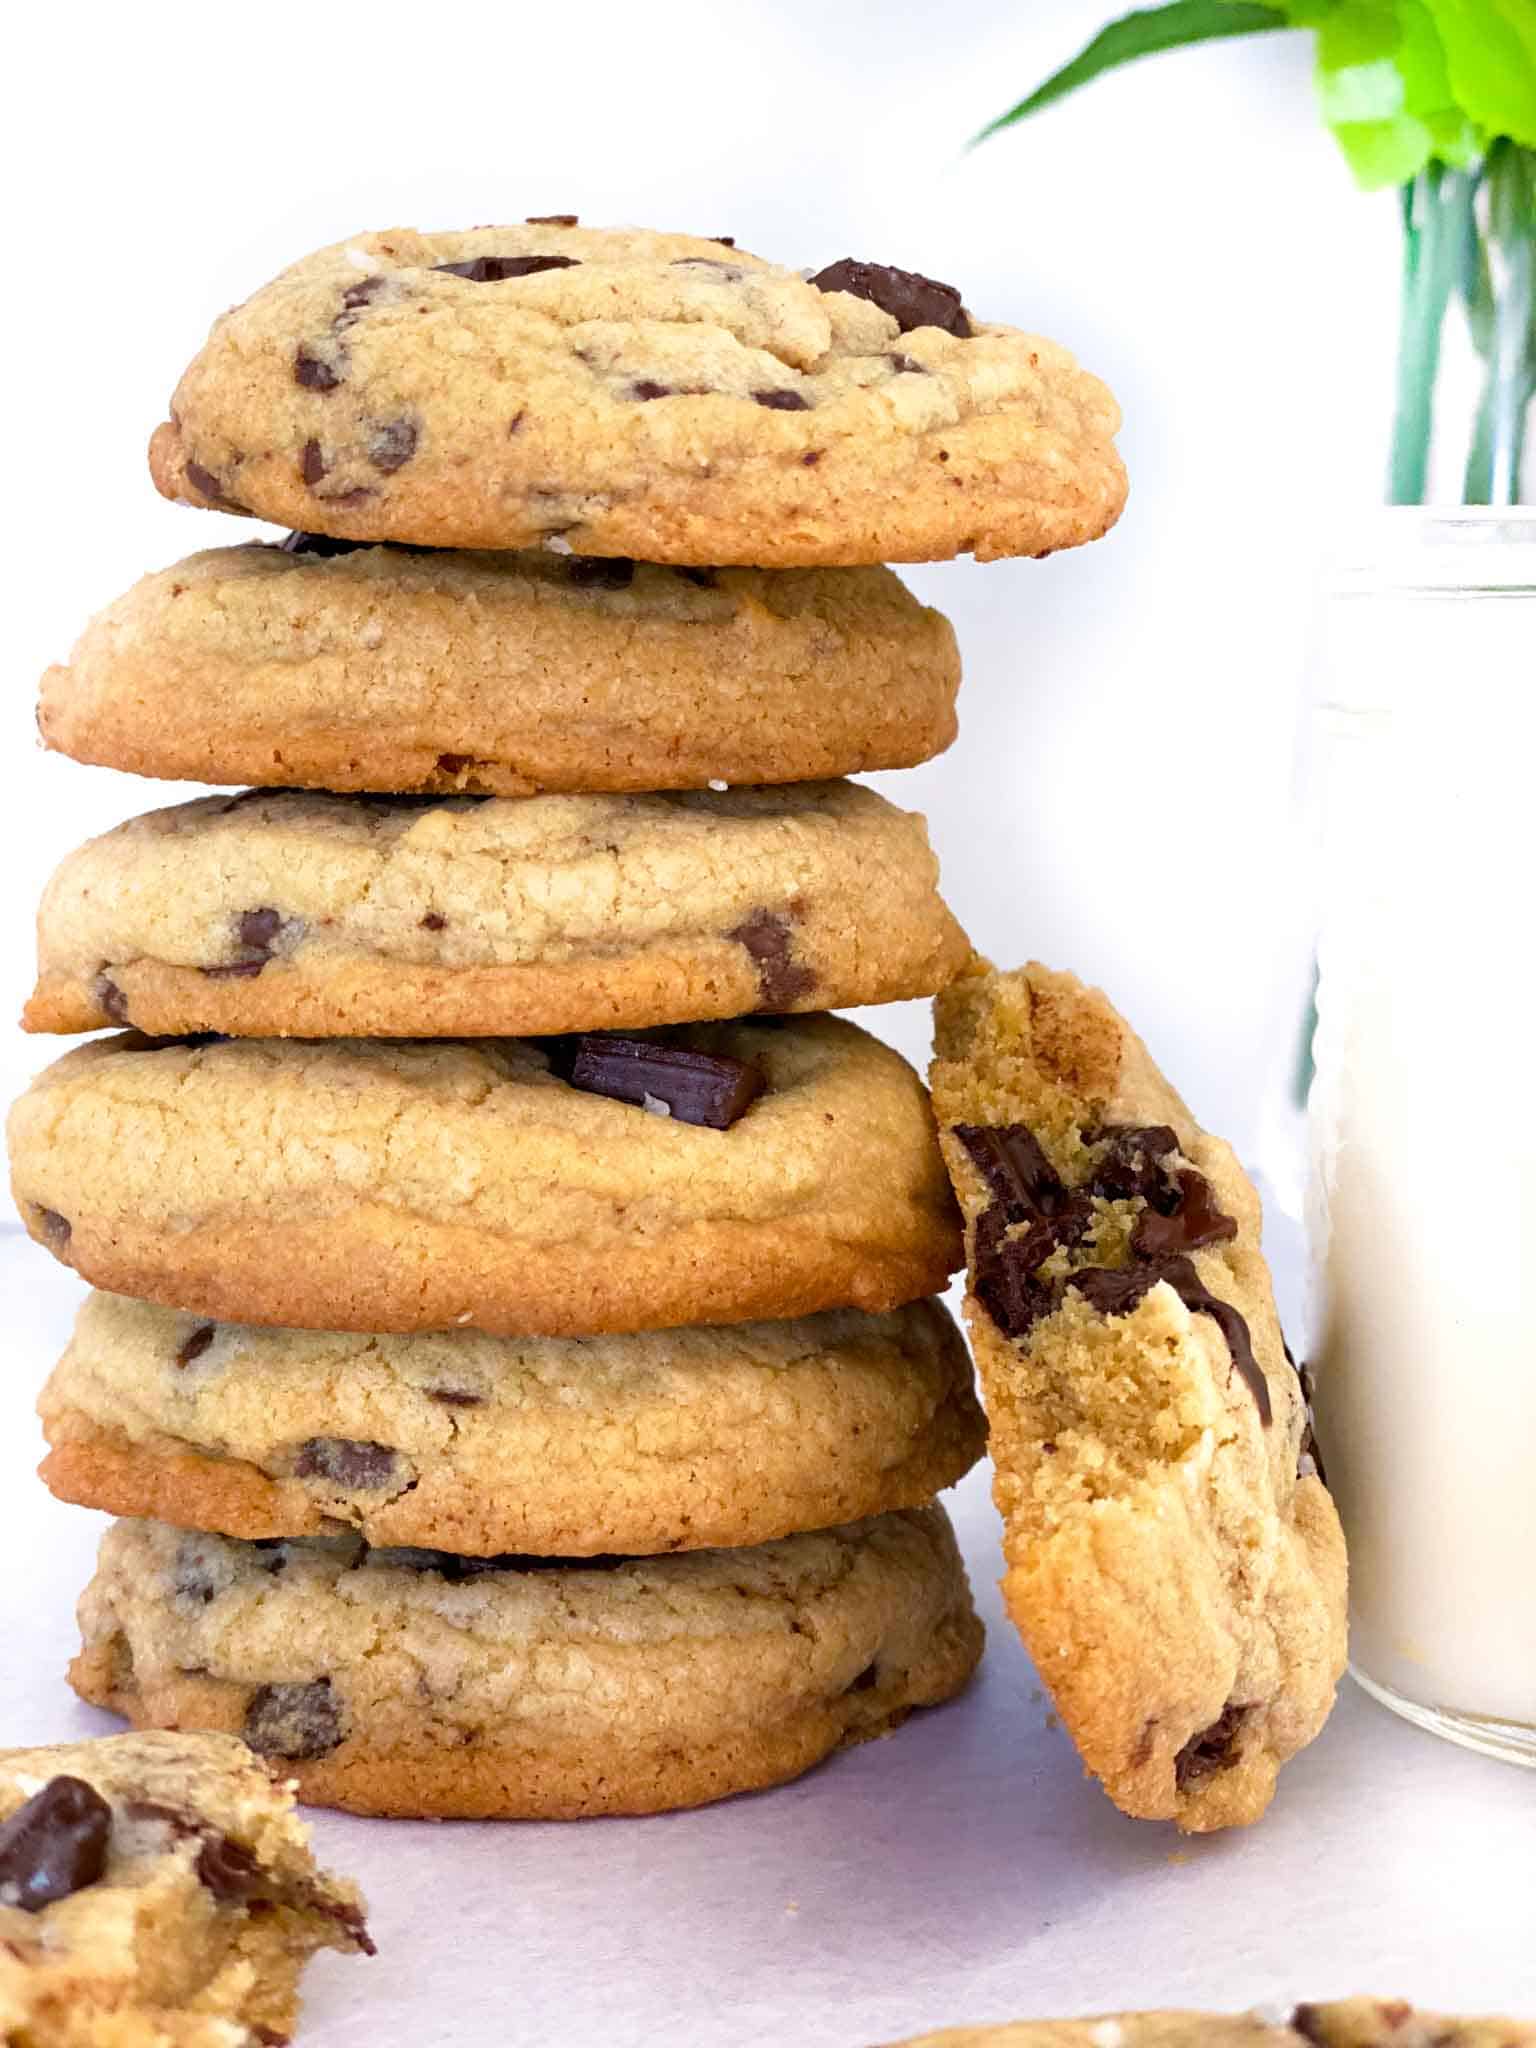 Six chocolate chip cookies without butter stacked on top of each other with a glass of milk next to it.